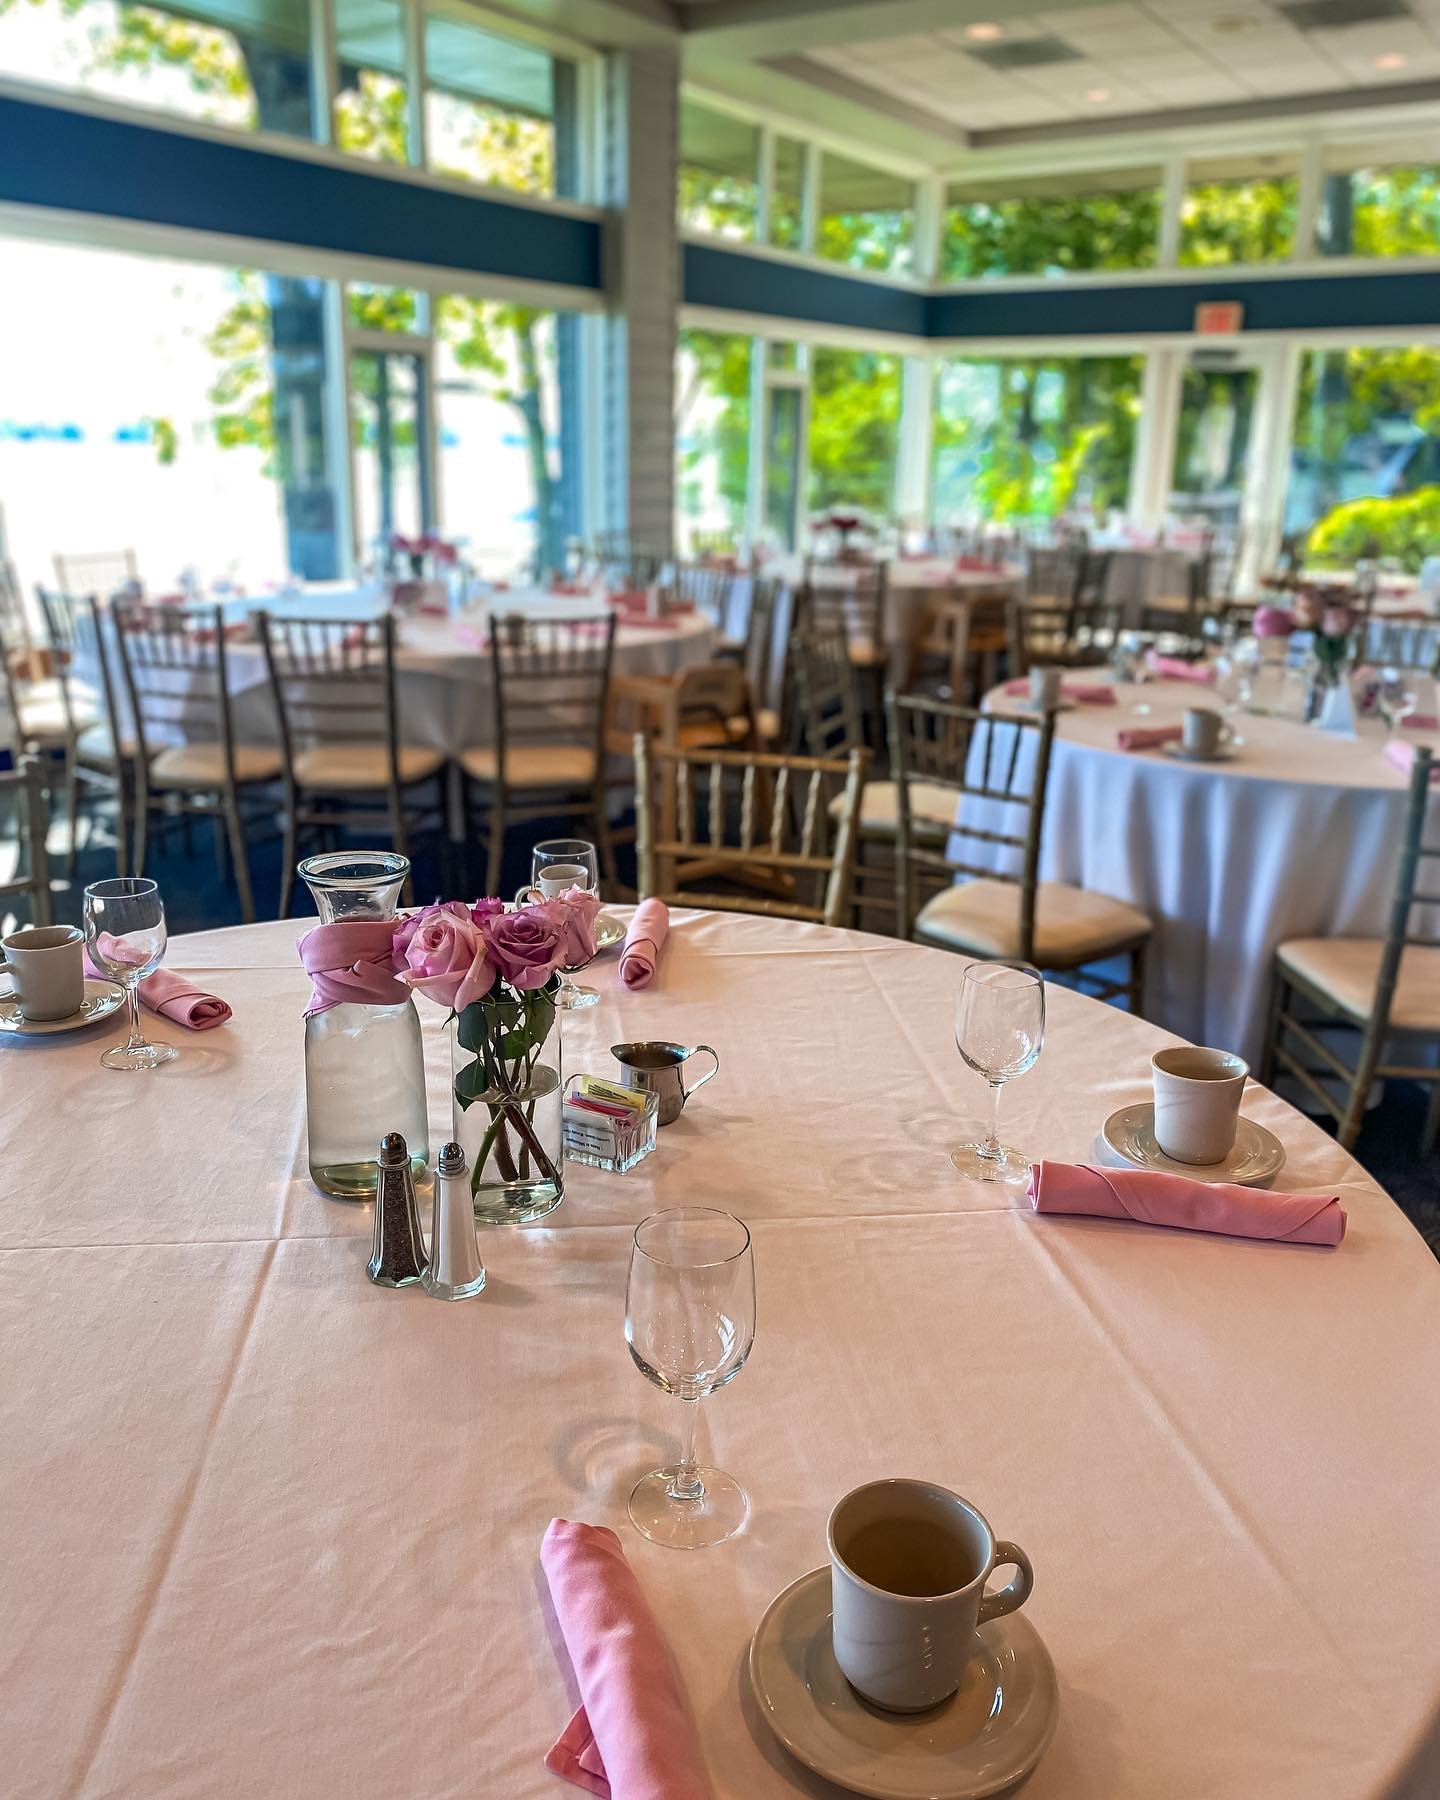 Cheers to the wonderful moms out there! Our brunches are filled with love and joy, thanks to our dedicated team, breathtaking view of Gull Lake, and cherished members and their families. Happy Mother&rsquo;s Day! 🌸💖🥂

Thank you again @therustykoop